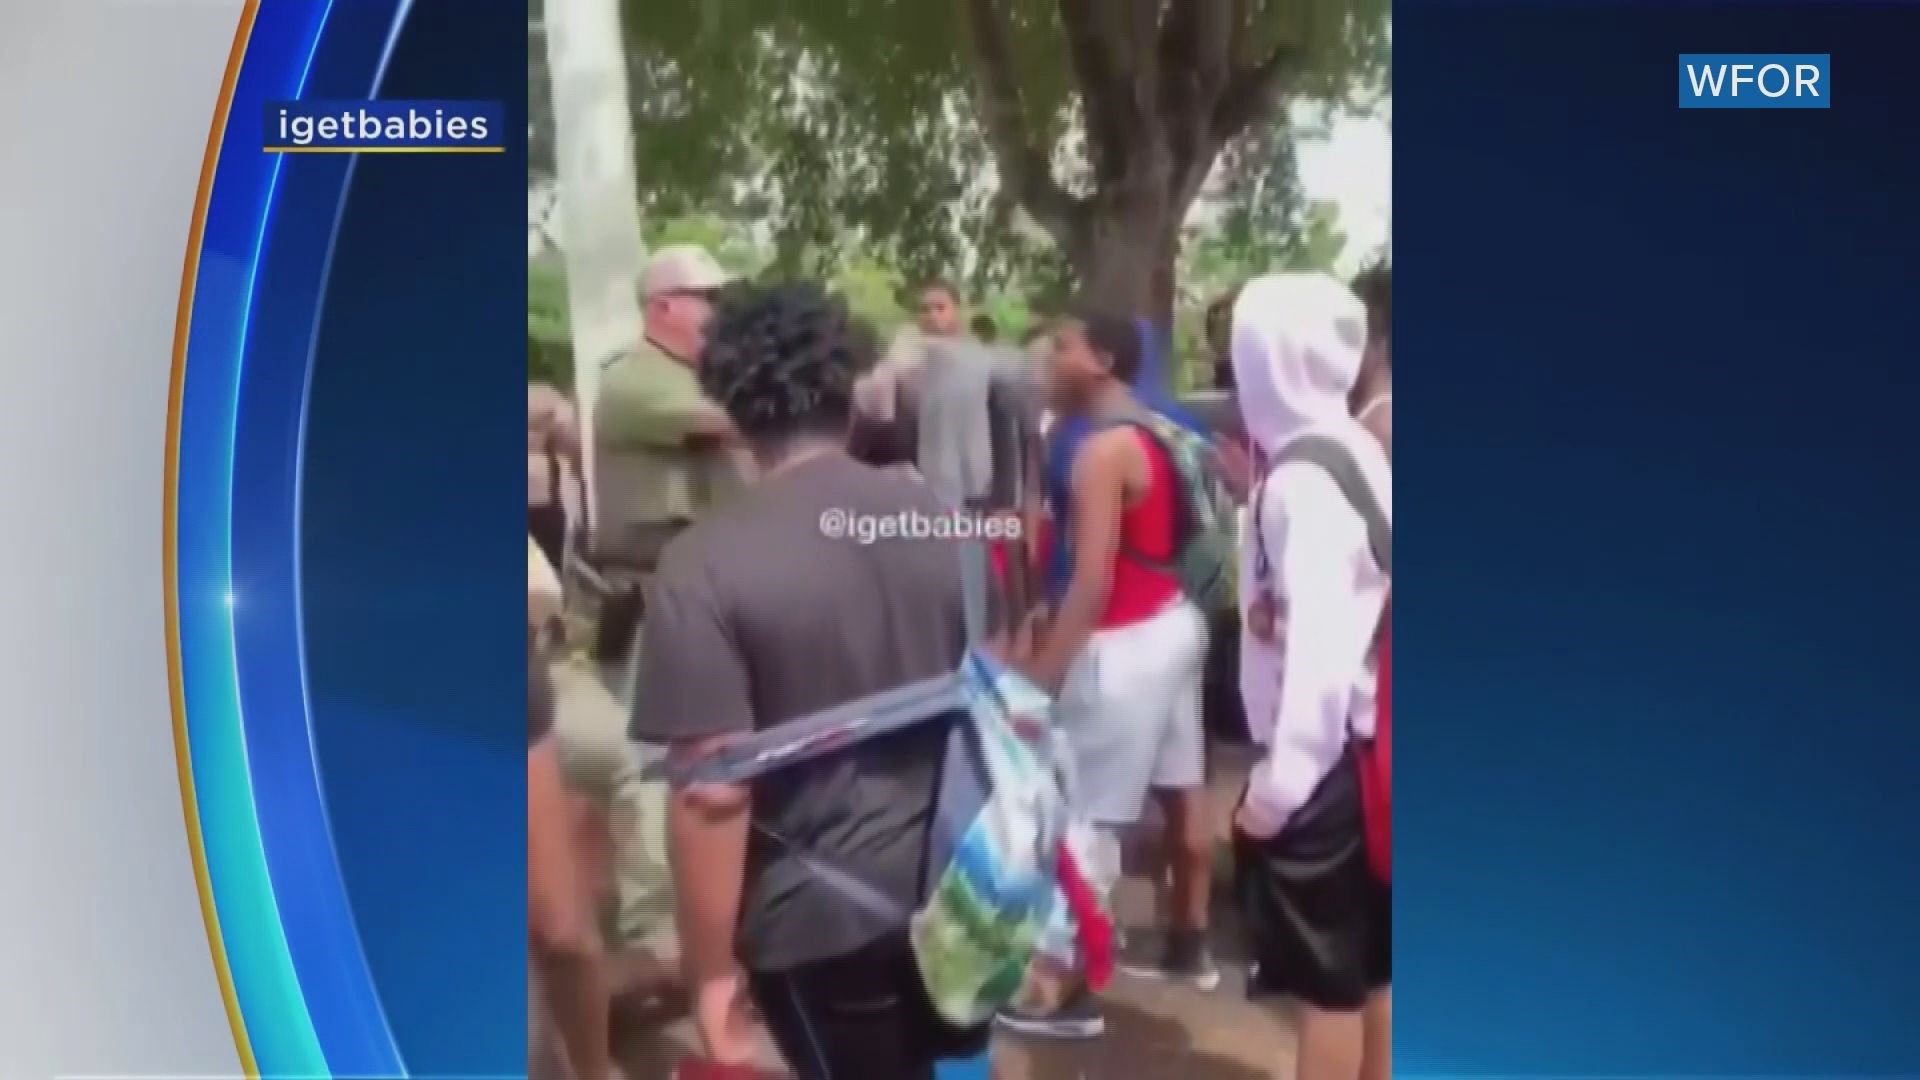 An encounter between a group of teenagers and Broward County Sheriff’s Office deputies that got physical was caught on video.